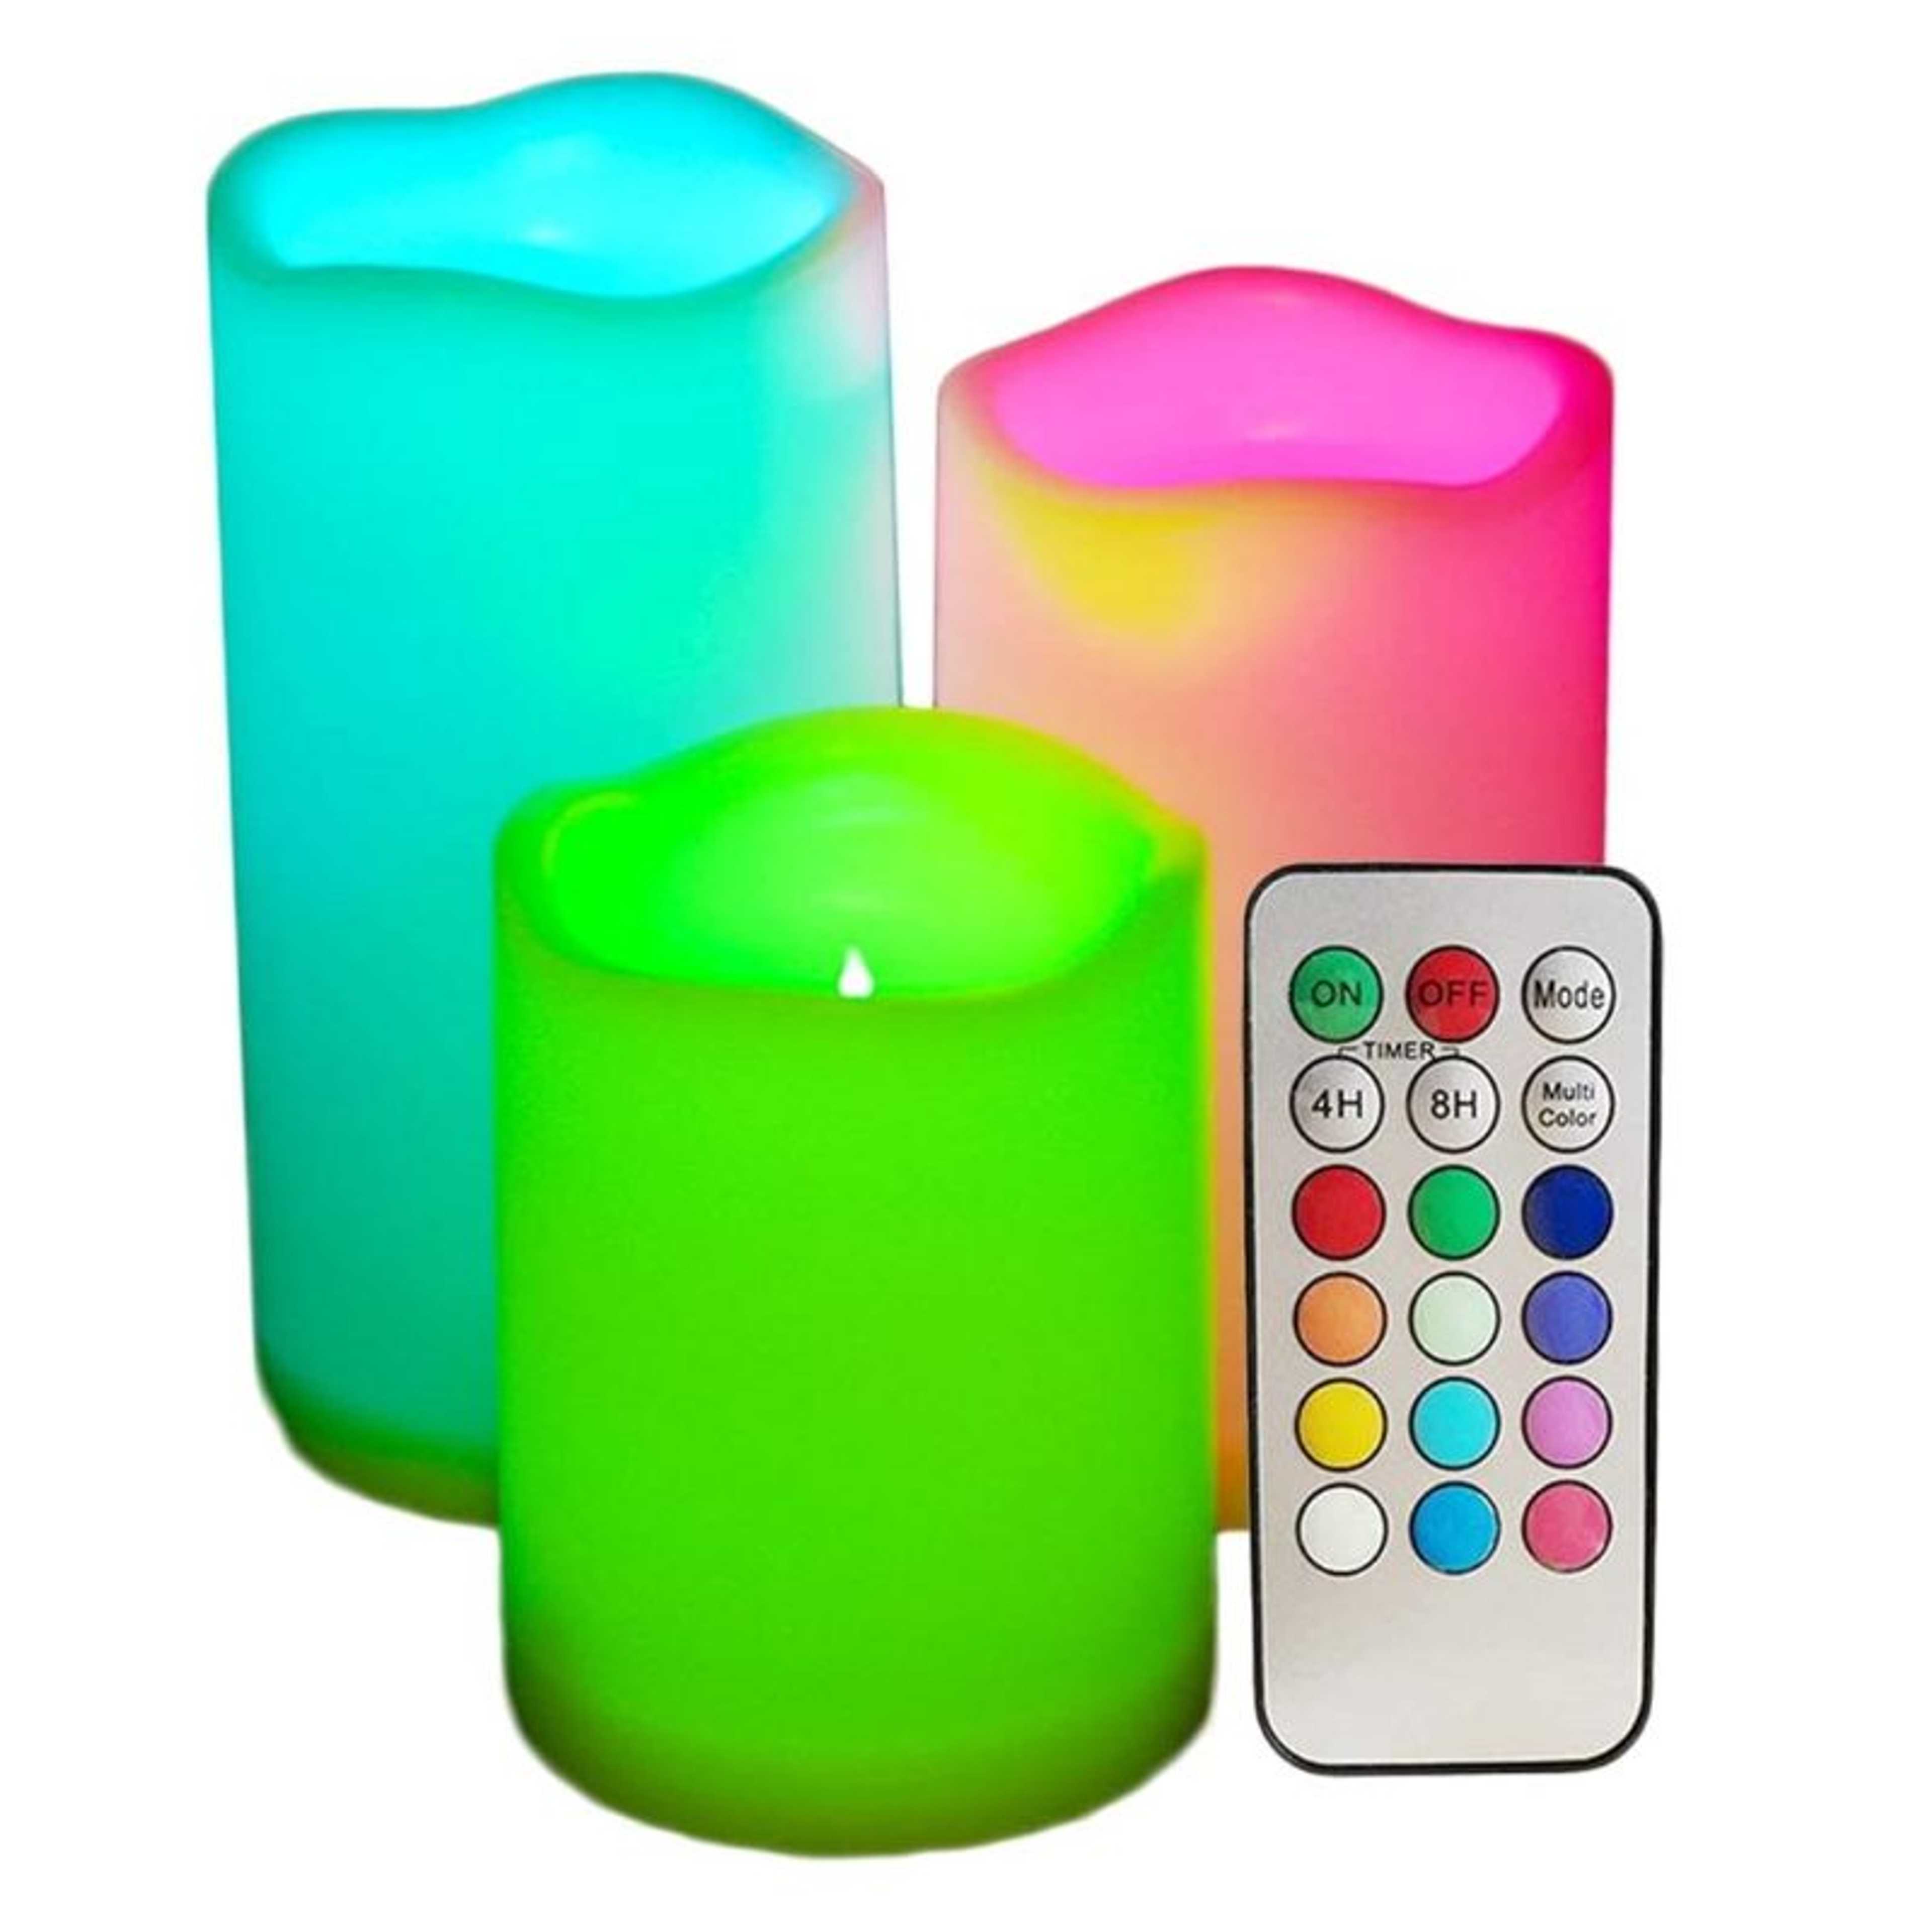 Set of 3 - Glow Color Changing Flameless Pillar Candles, with Remote & Timer, Glow Candles � Flameless Color-Changing Candles, 3 Battery-operated LED Pillar Candles with Remote